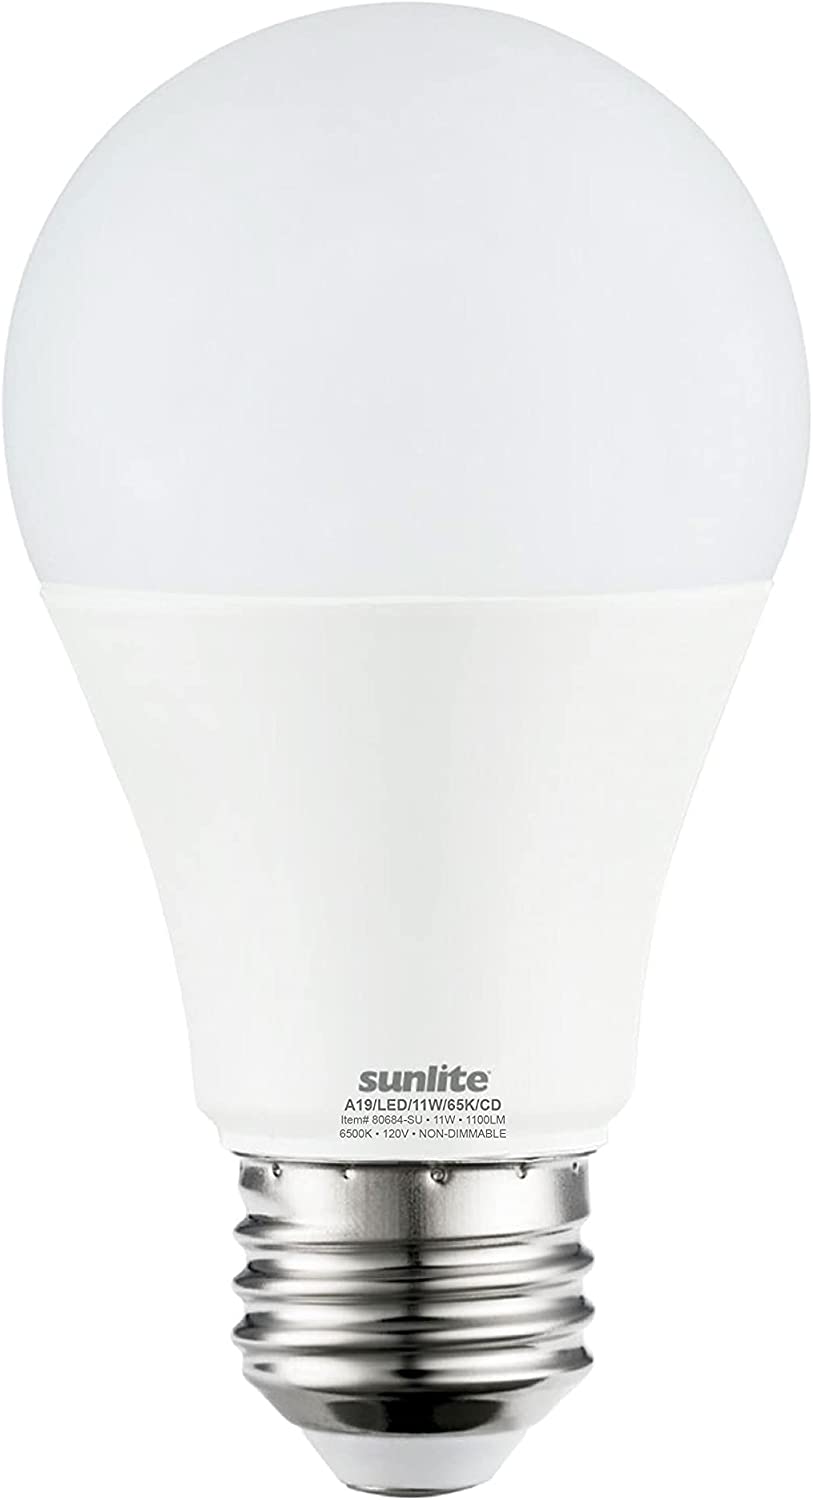 Sunlite LED Bulb 75 w  Upgrade to LED with this standard A19 shape household light bulb with medium base (E26). These non-dimmable bulbs are an energy efficient replacement for incandescent bulbs. At 11 watts, they use less energy  -80684